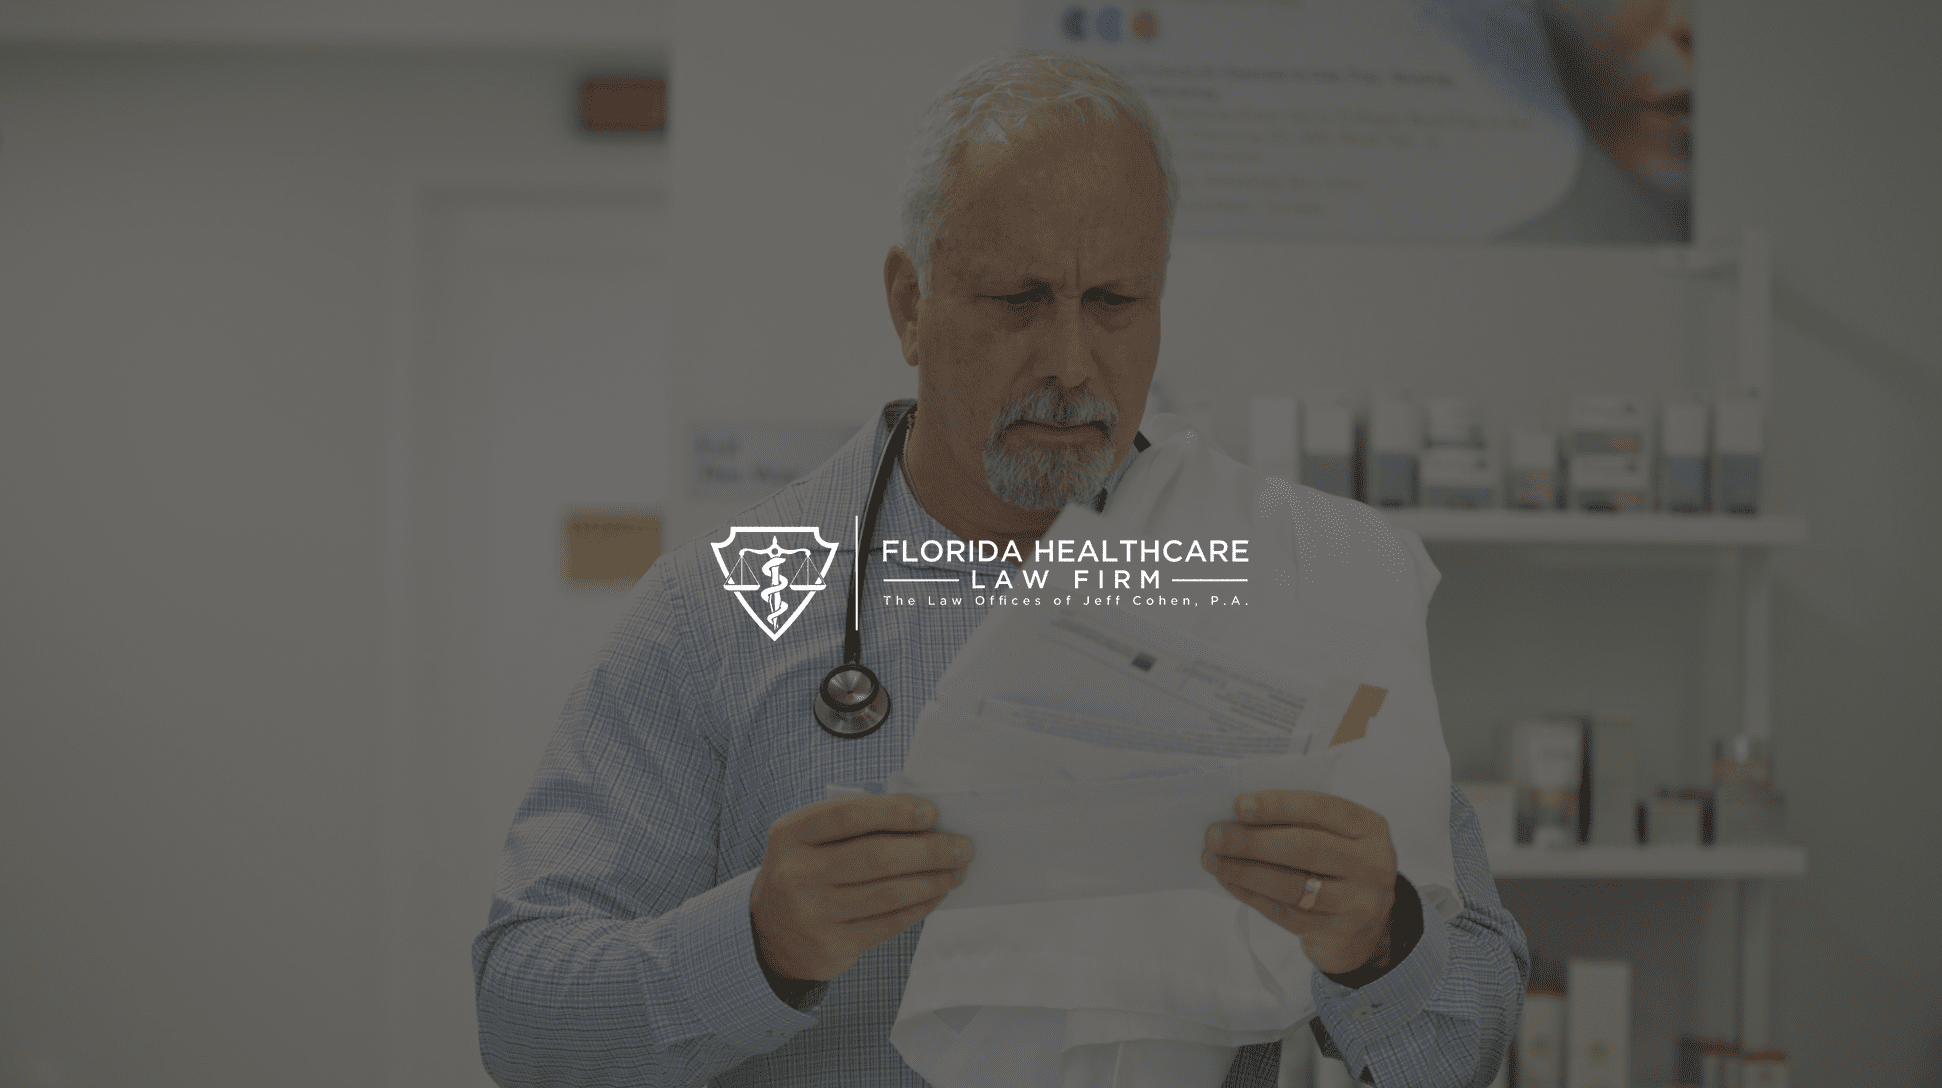 IU C&I Studios Page White Florida Healthcare The Law Offices of Jeff Cohen, P.A. Logo with a background of a doctor looking at papers